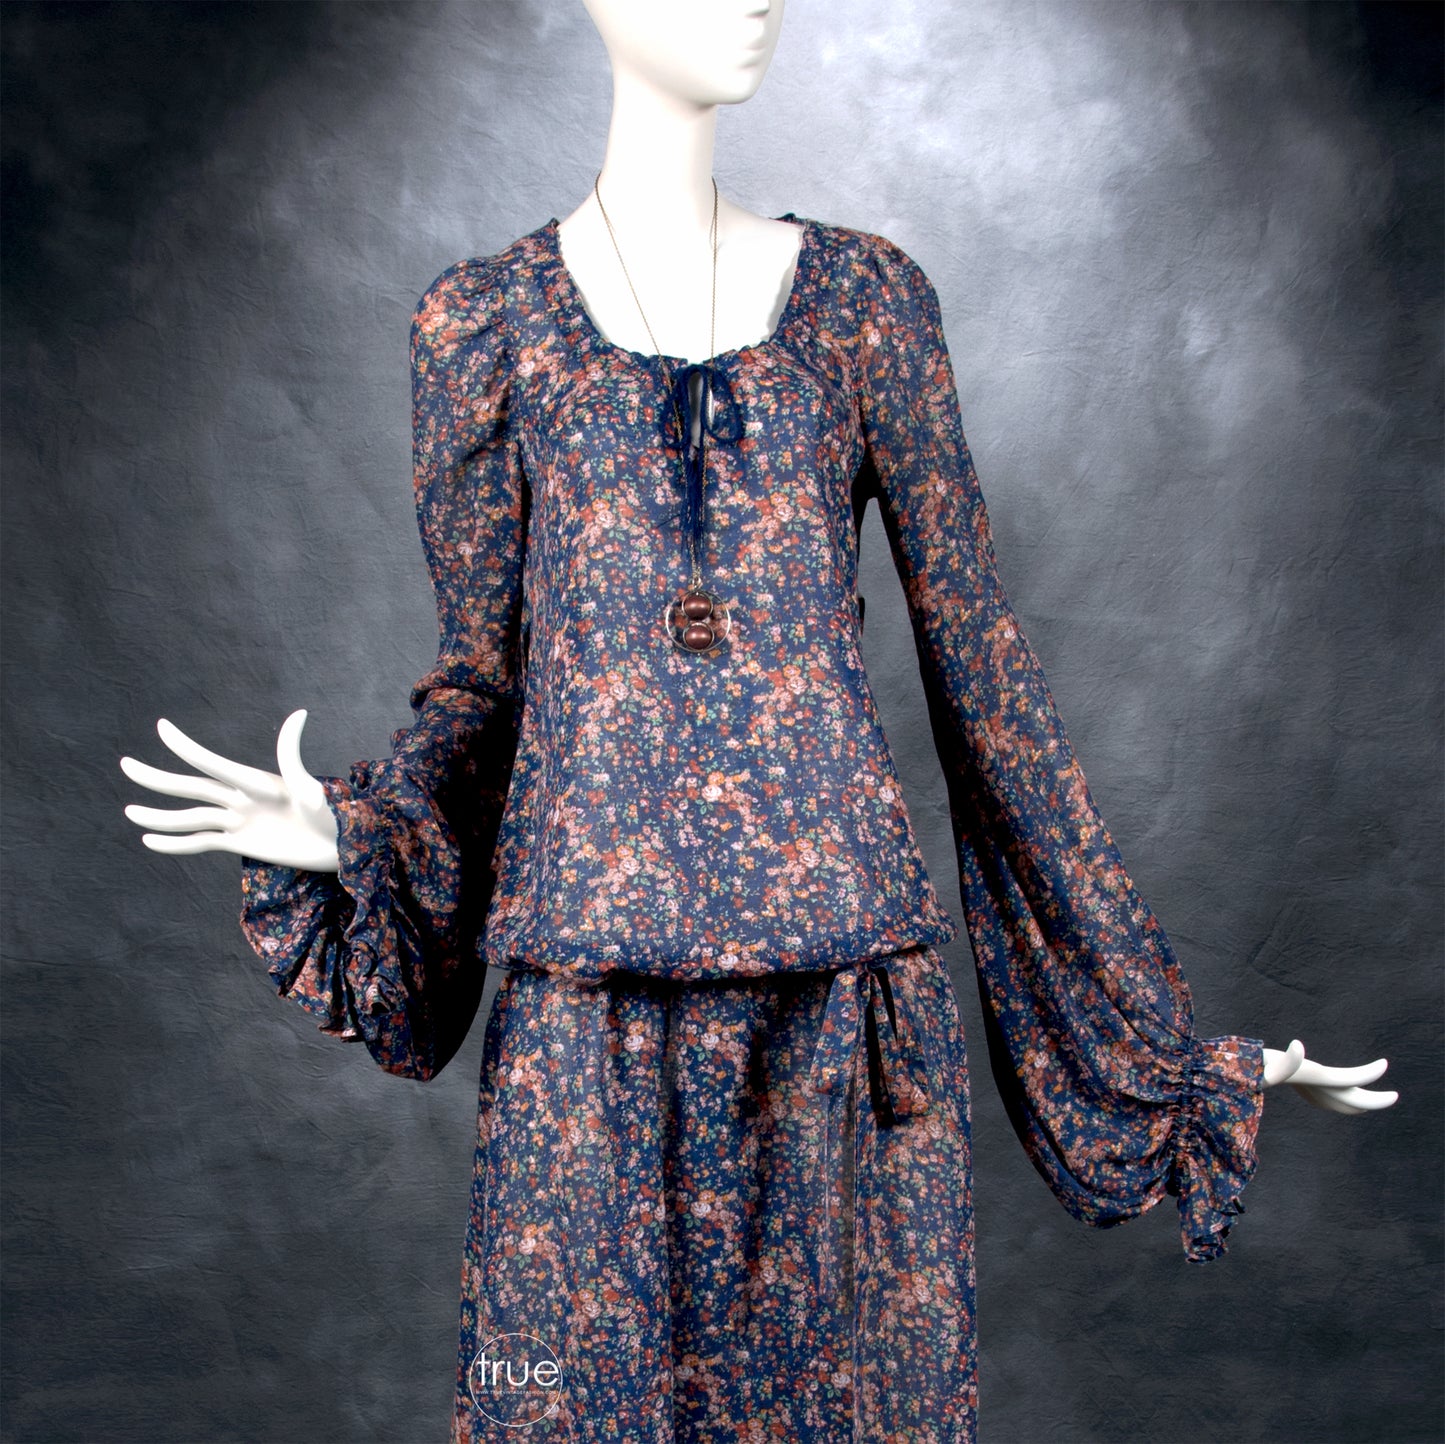 vintage 1970's dress ...rare Betsey Johnson ALLEY CAT floral maxi dress w/bishop sleeves & convertible straps